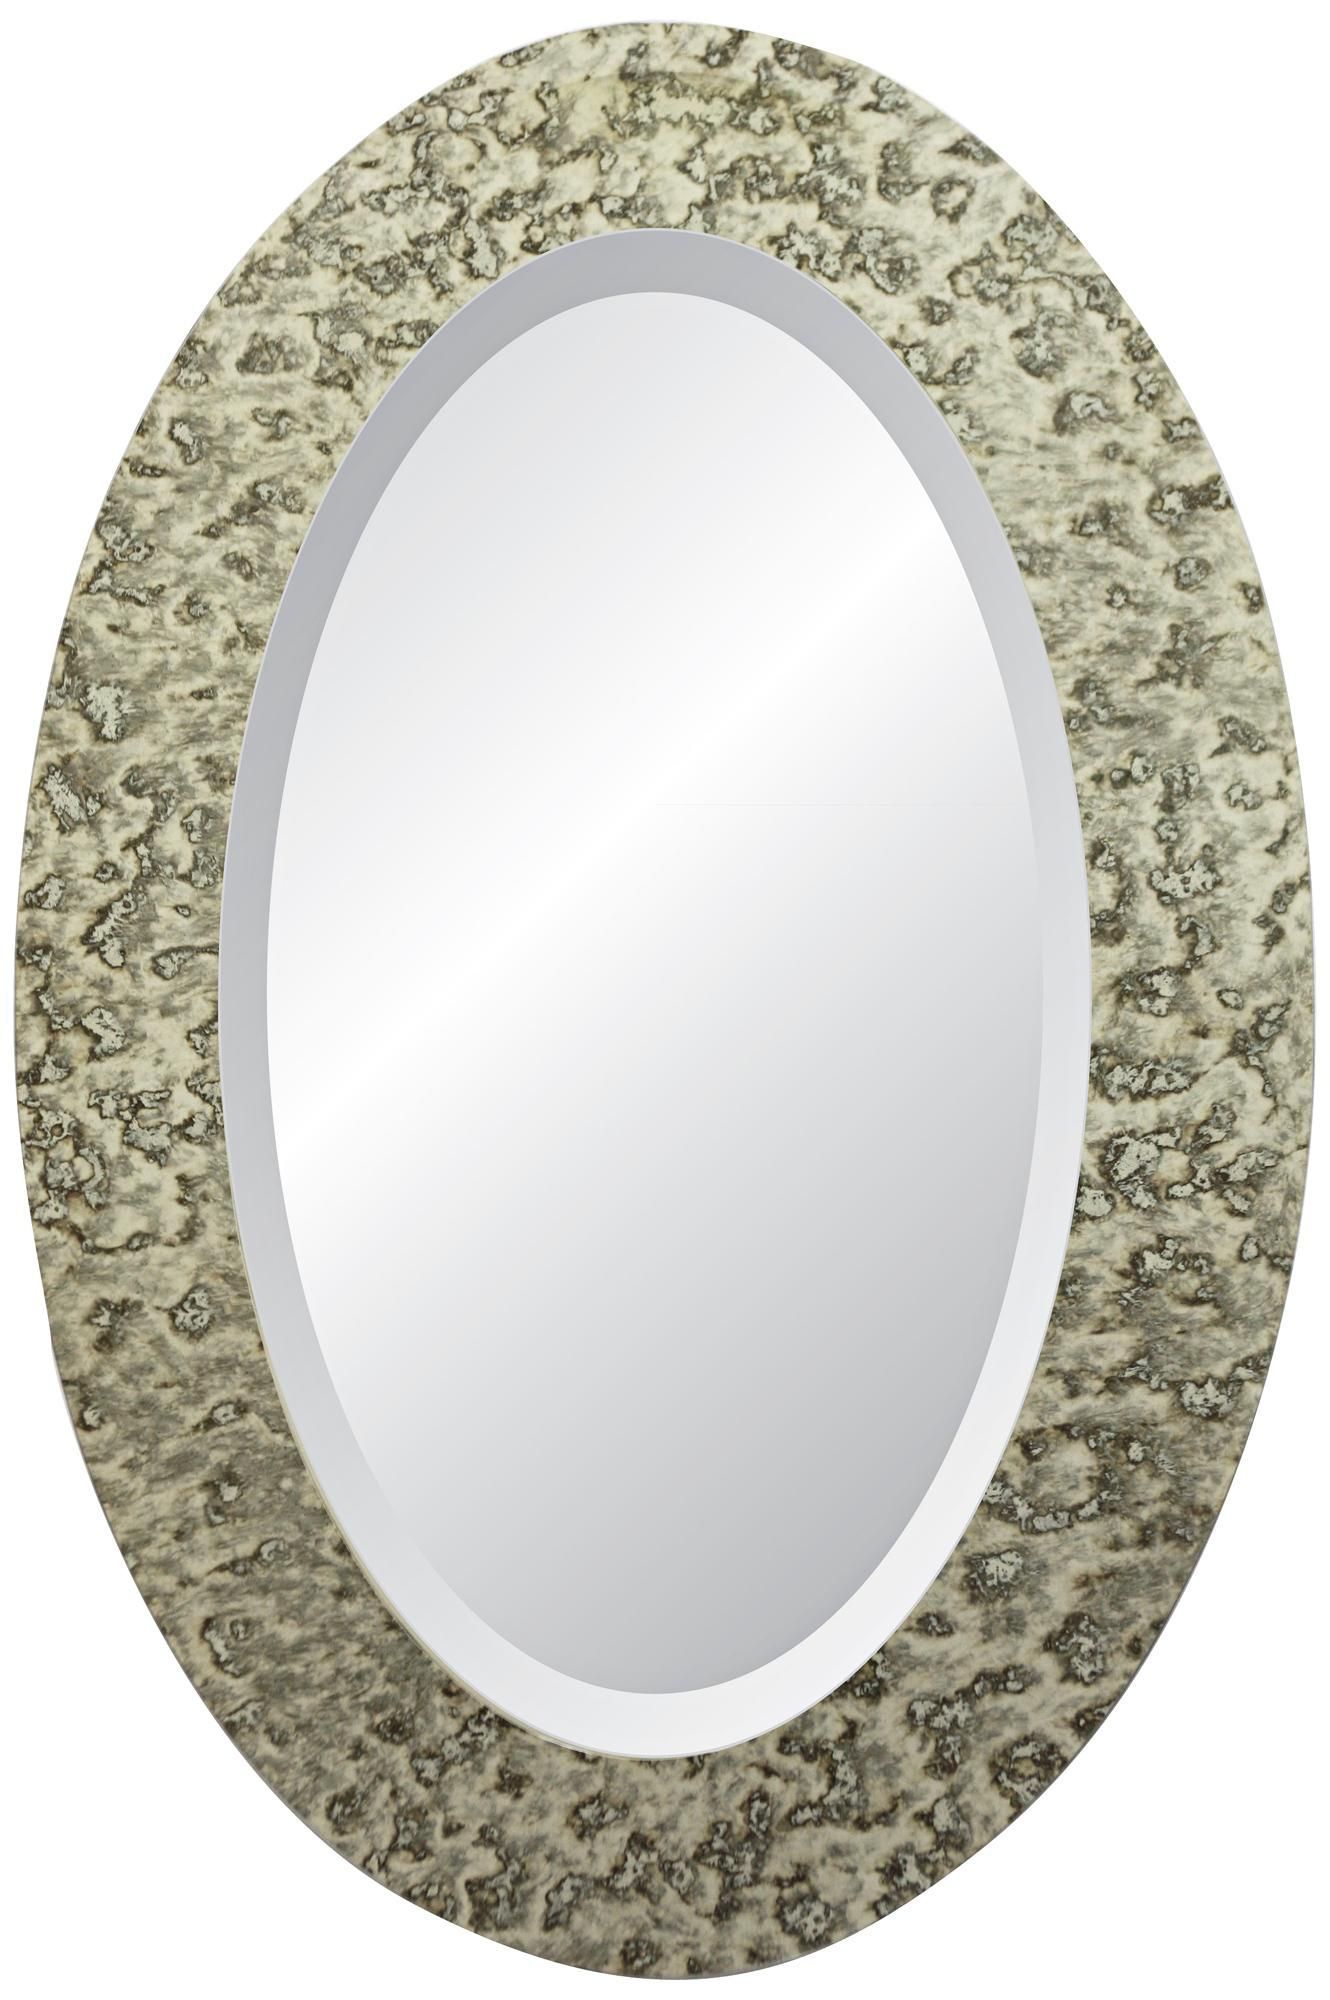 Dijon Signature 36" High Oval Wall Mirror – #x3060 | Lamps Plus | Oval For Black Oval Cut Wall Mirrors (View 6 of 15)